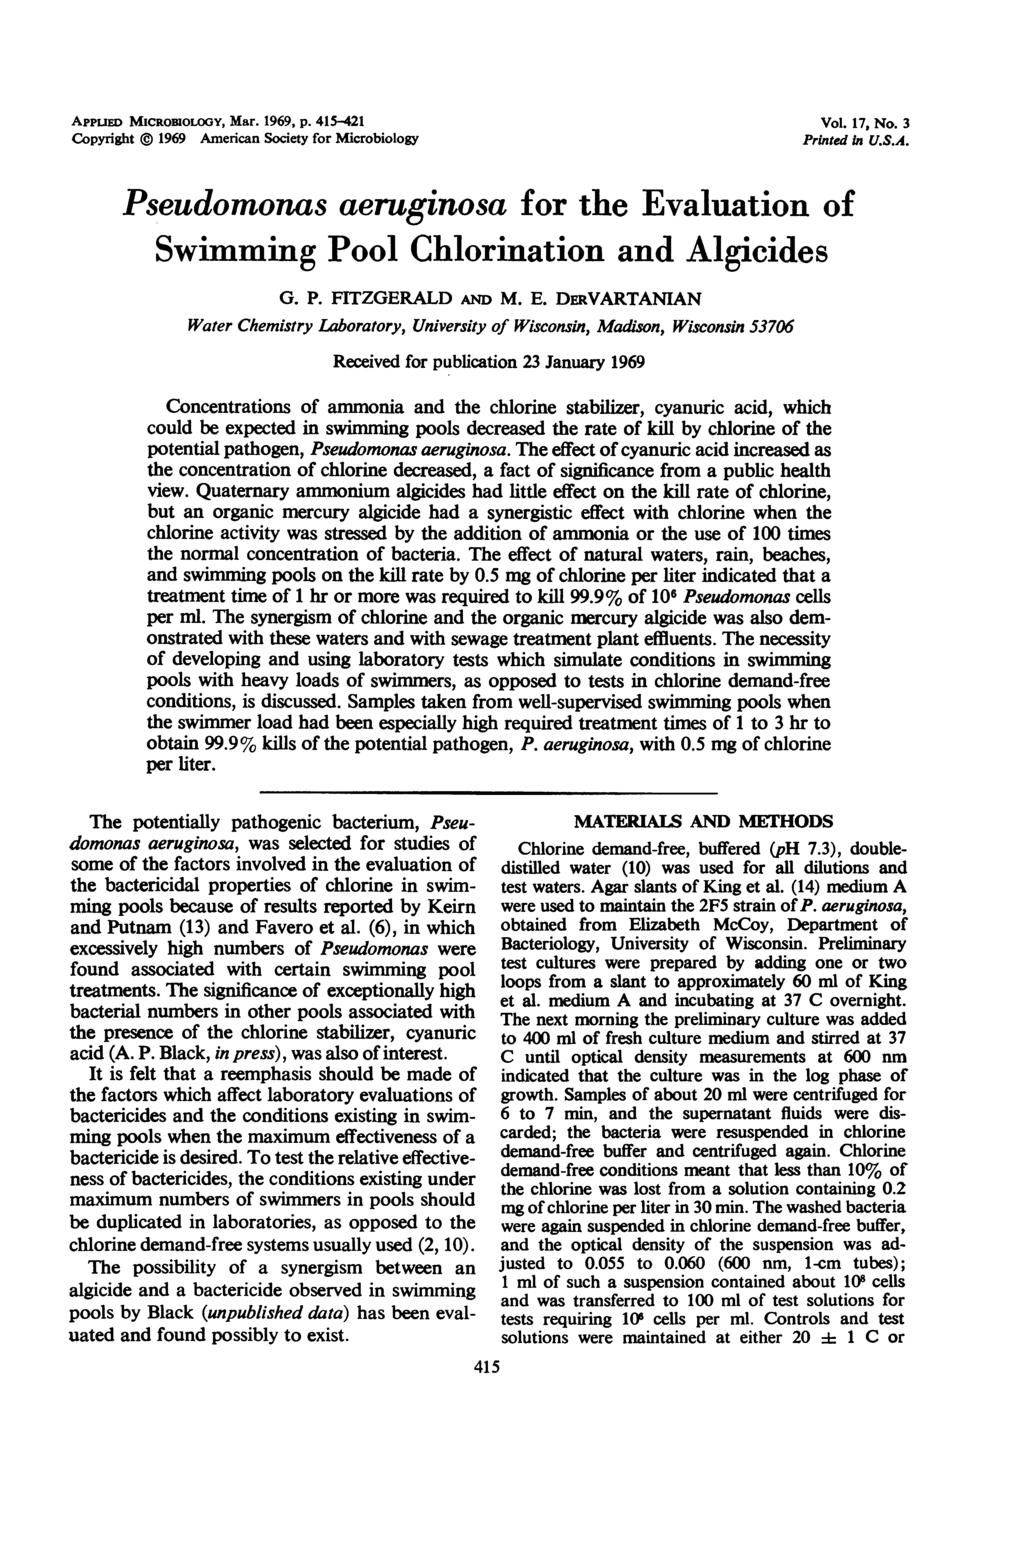 APPum MICROBIOLOGY, Mar. 1969, p. 415-421 Copyright @ 1969 American Society for Microbiology Vol. 17, No. 3 Printed In U.S.A. Pseudomonas aeruginosa for the Evaluation of Swimming Pool Chlorination and Algicides G.